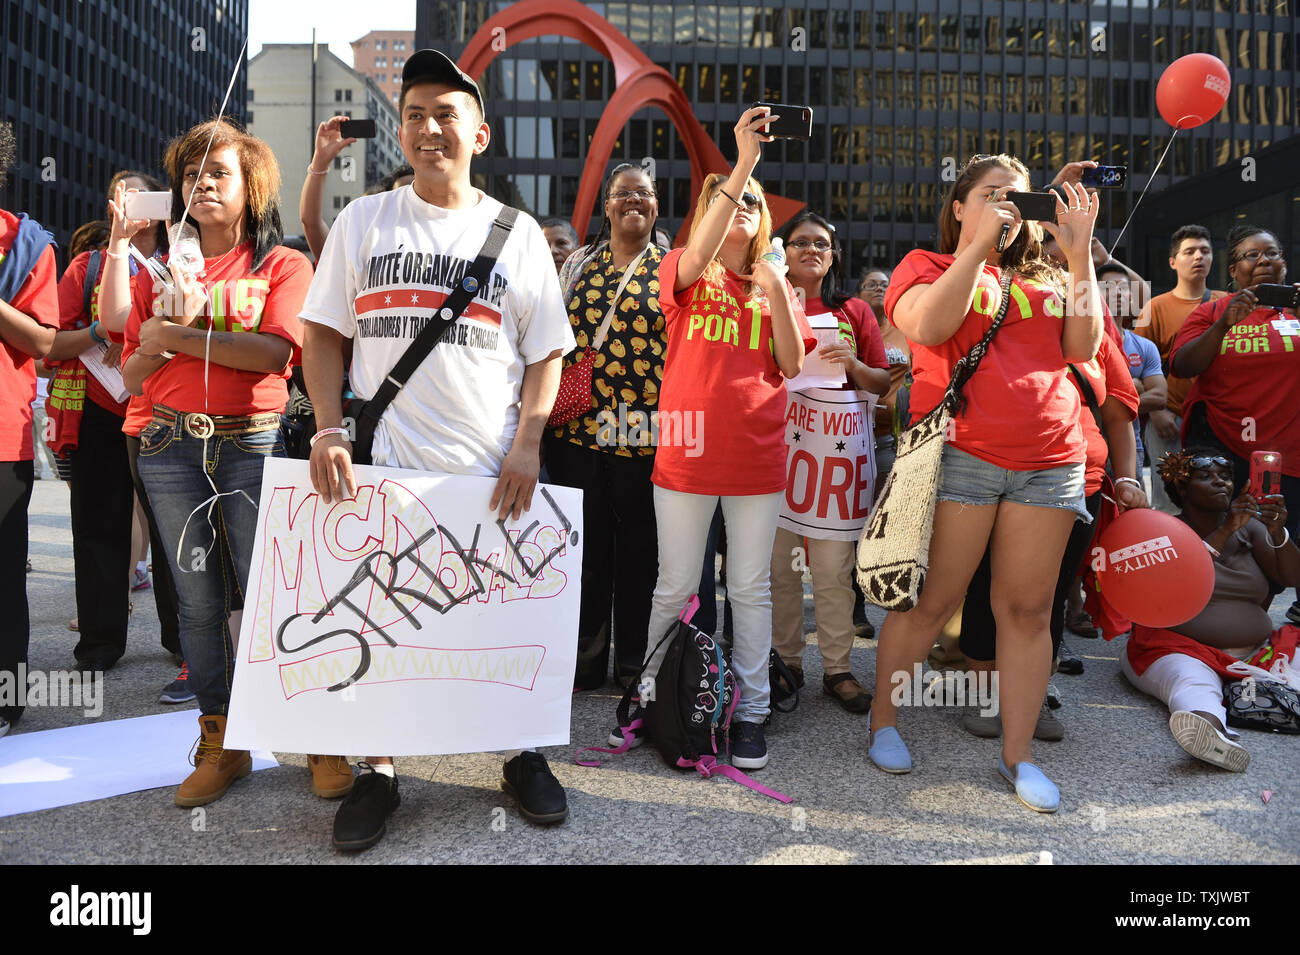 Protesters rally in support of striking fast food workers, who walked off the job in nearly 60 cities, at Federal Plaza in Chicago on August 29, 2013.  Strikers are calling for an increase in the Federal minimum wage from $7.25 to $15 per hour.     UPI/Brian Kersey Stock Photo